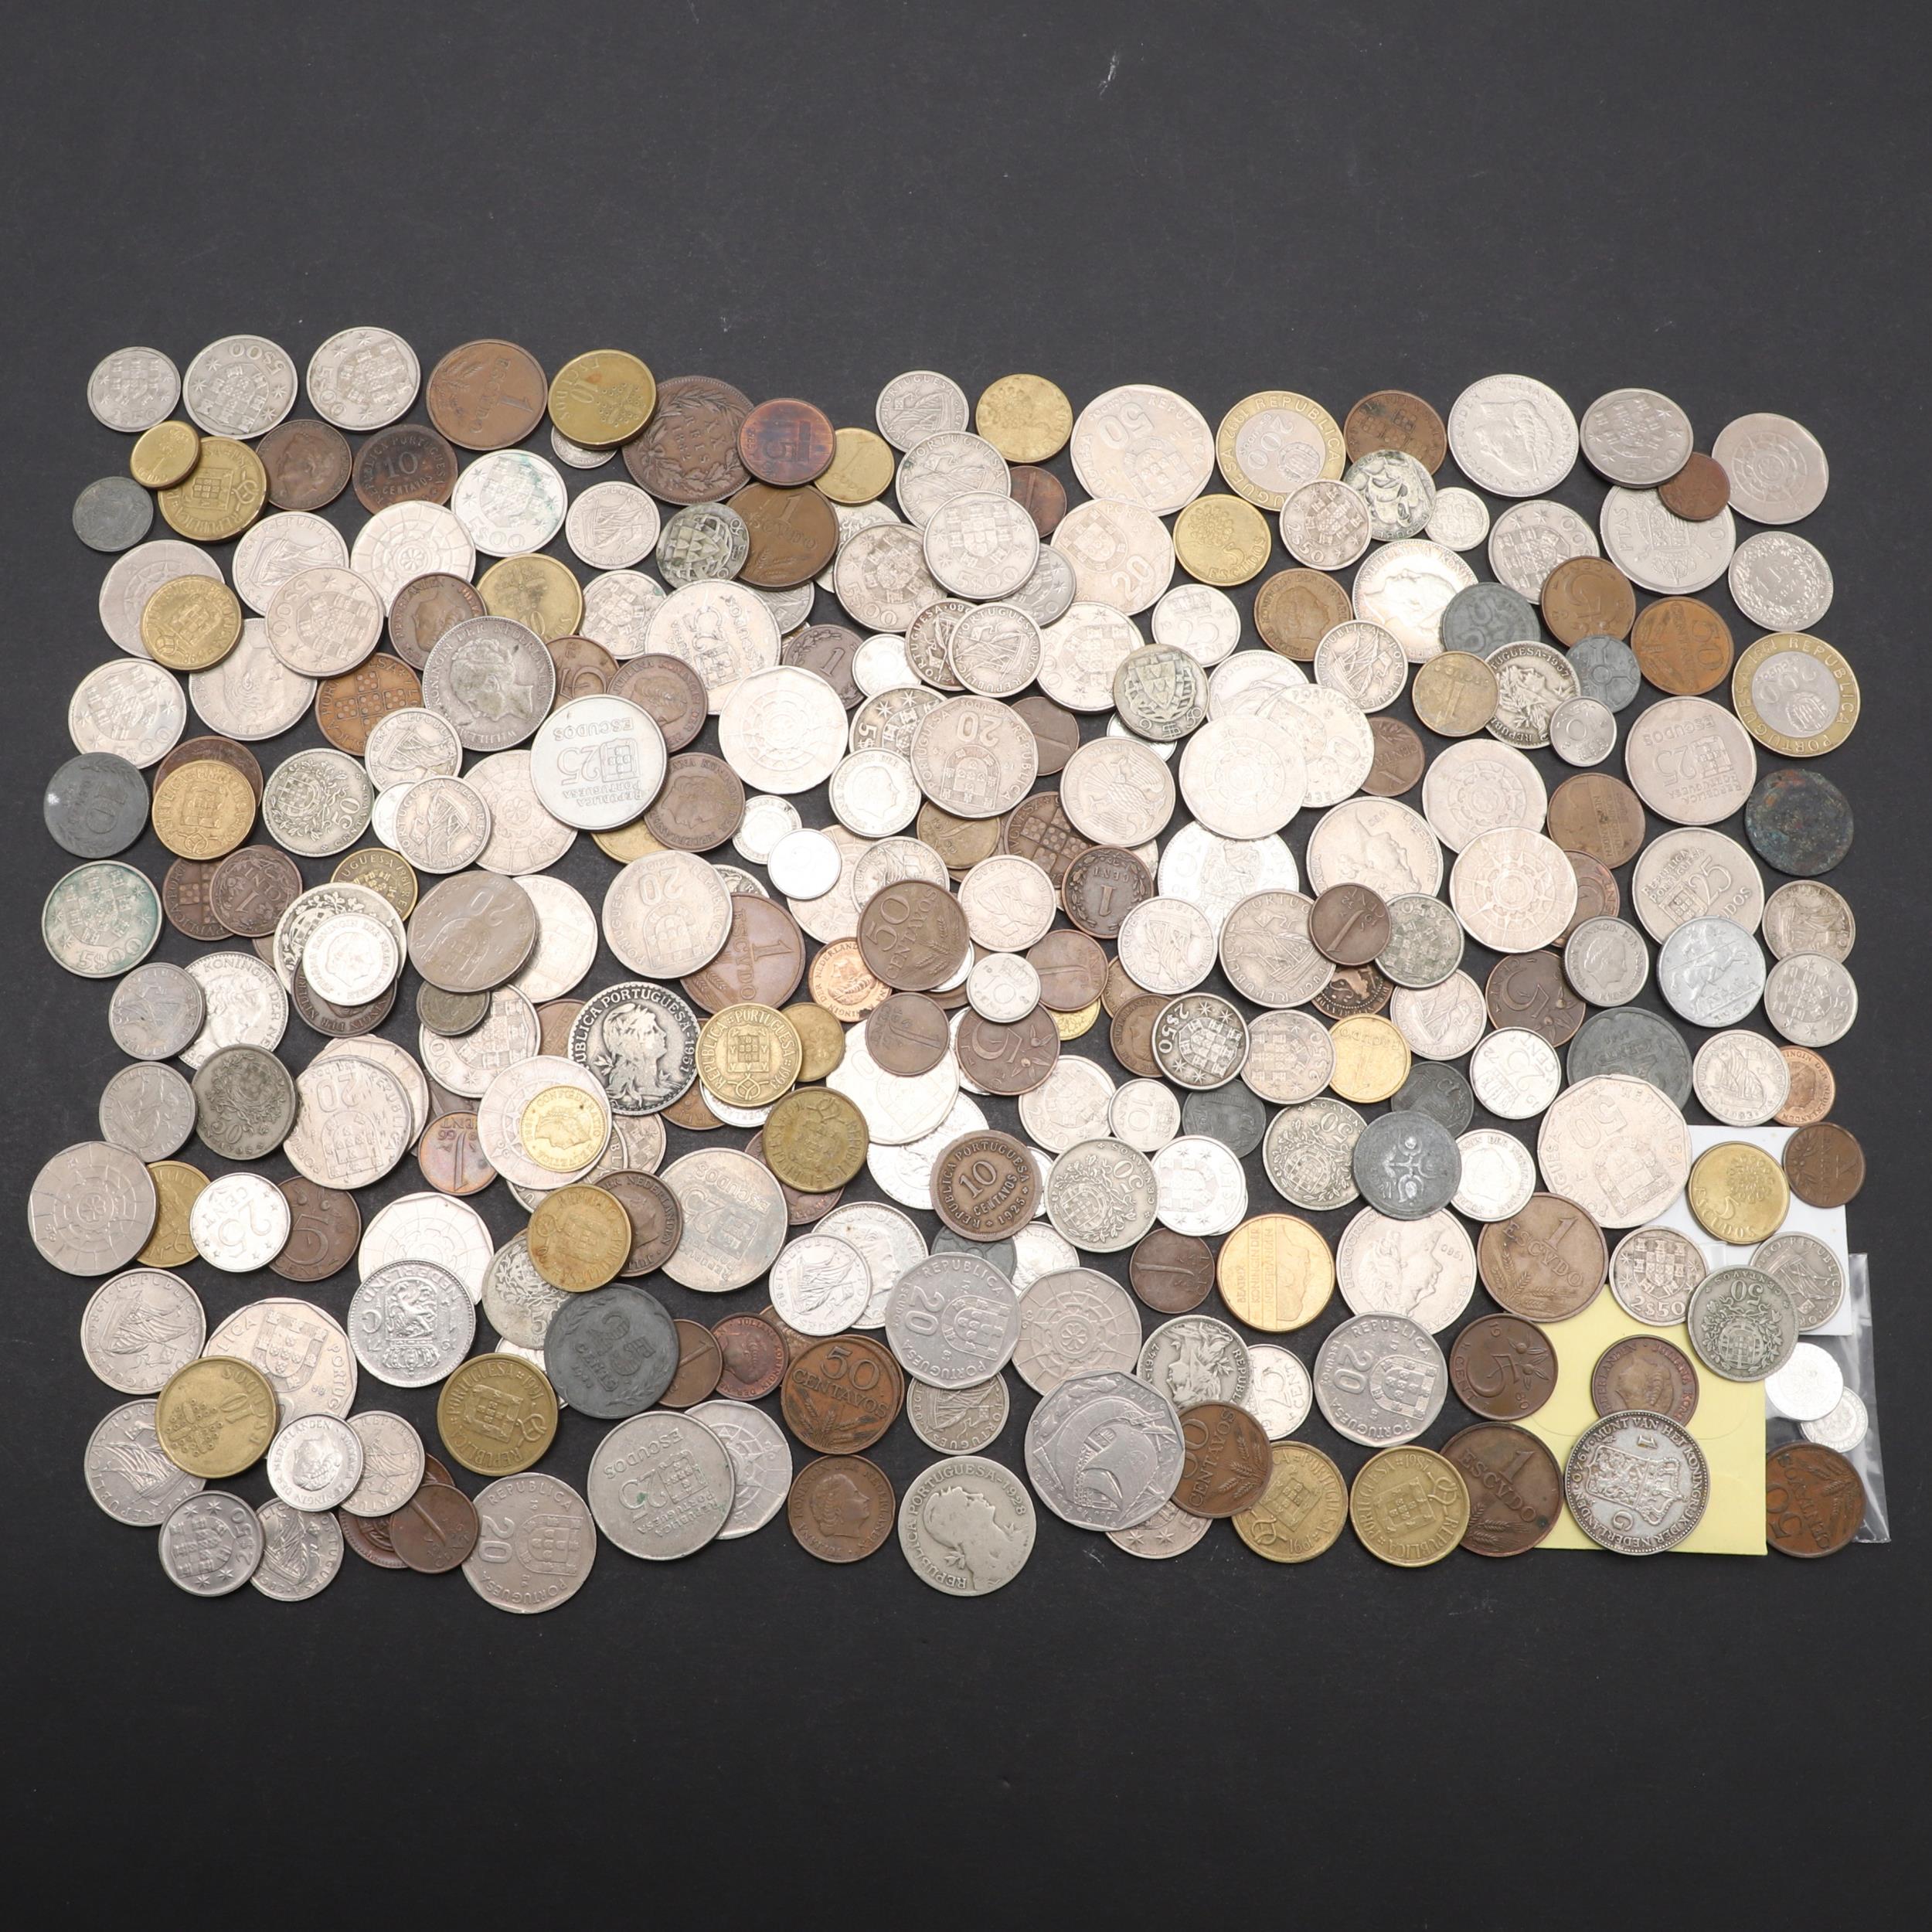 A MIXED COLLECTION OF PORTUGUESE, DUTCH AND OTHER WORLD COINS.